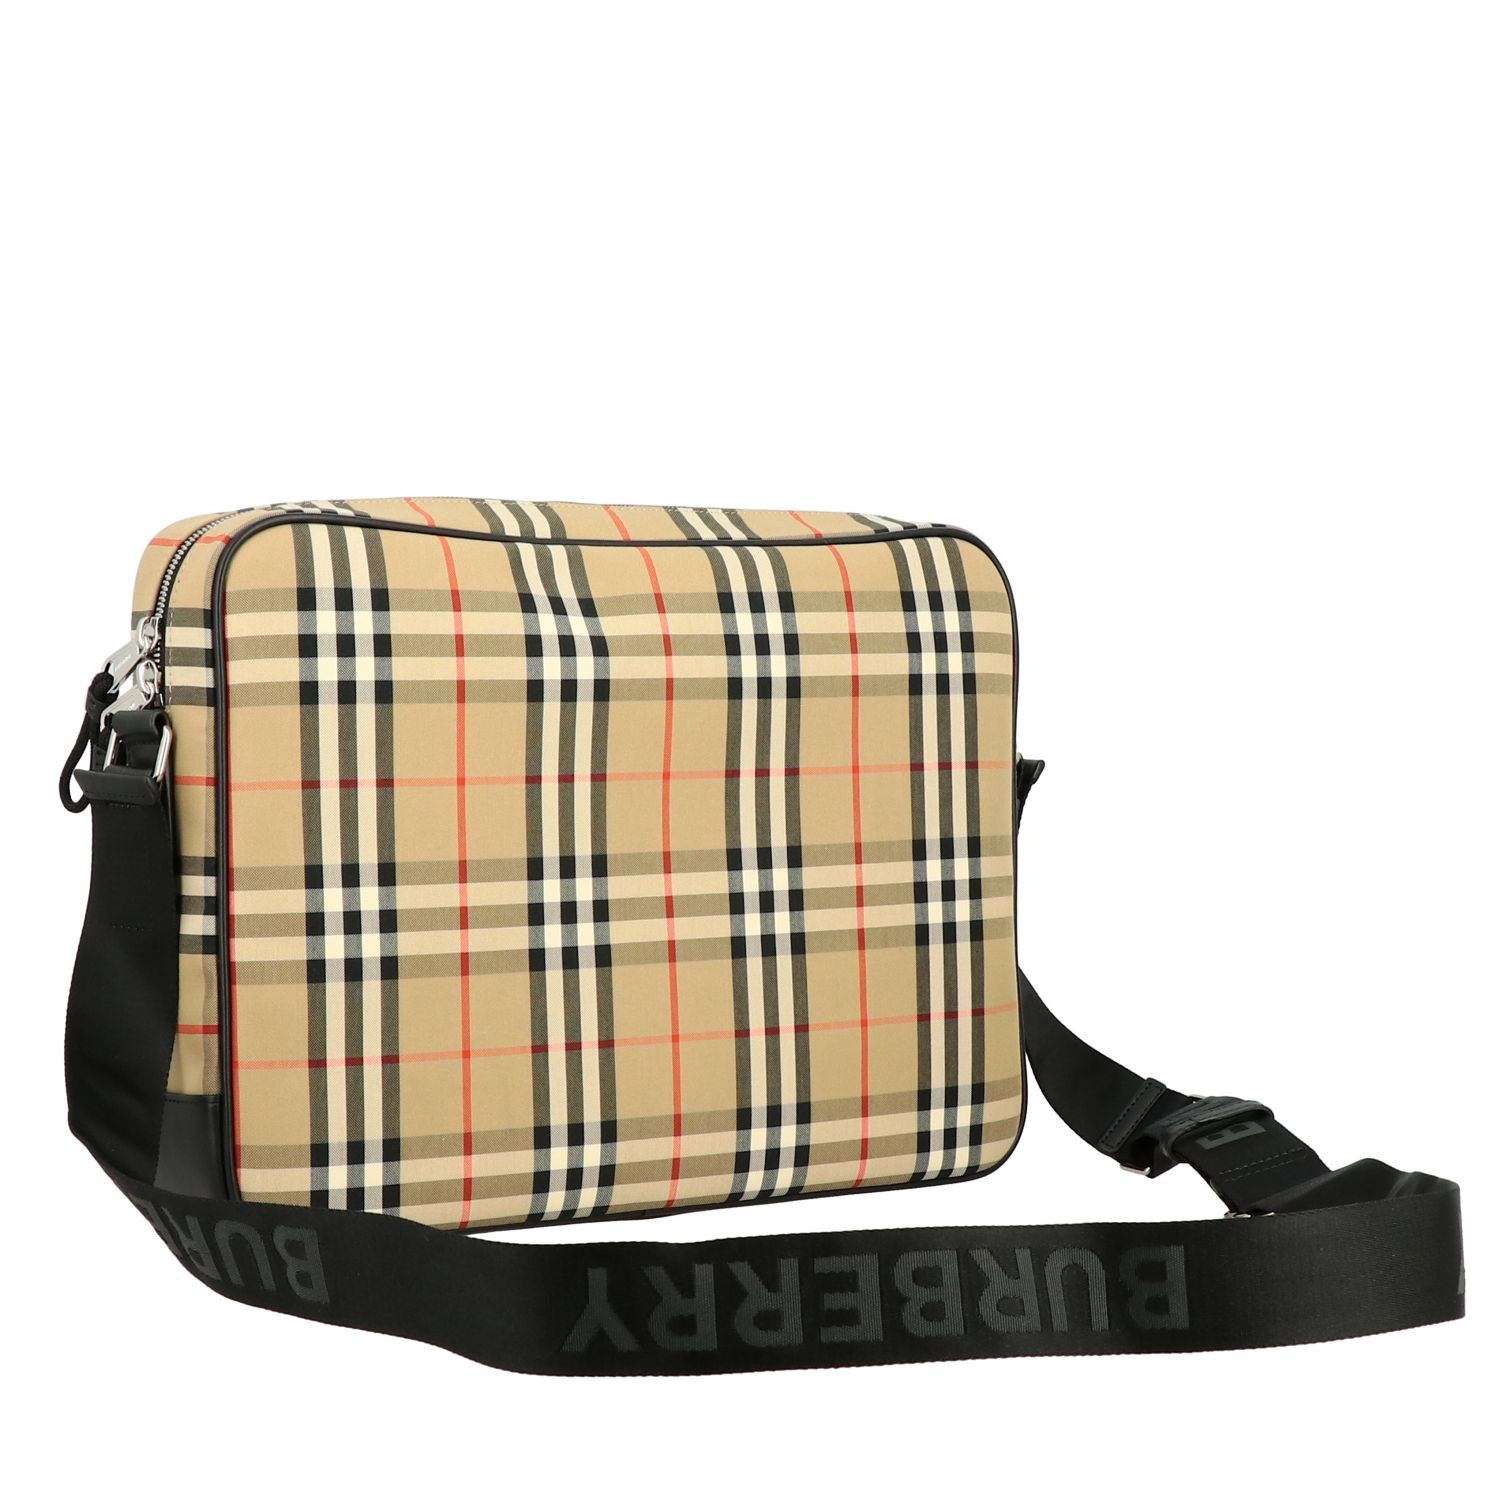 Burberry Outlet: messenger bag in cotton with vintage check motif ...